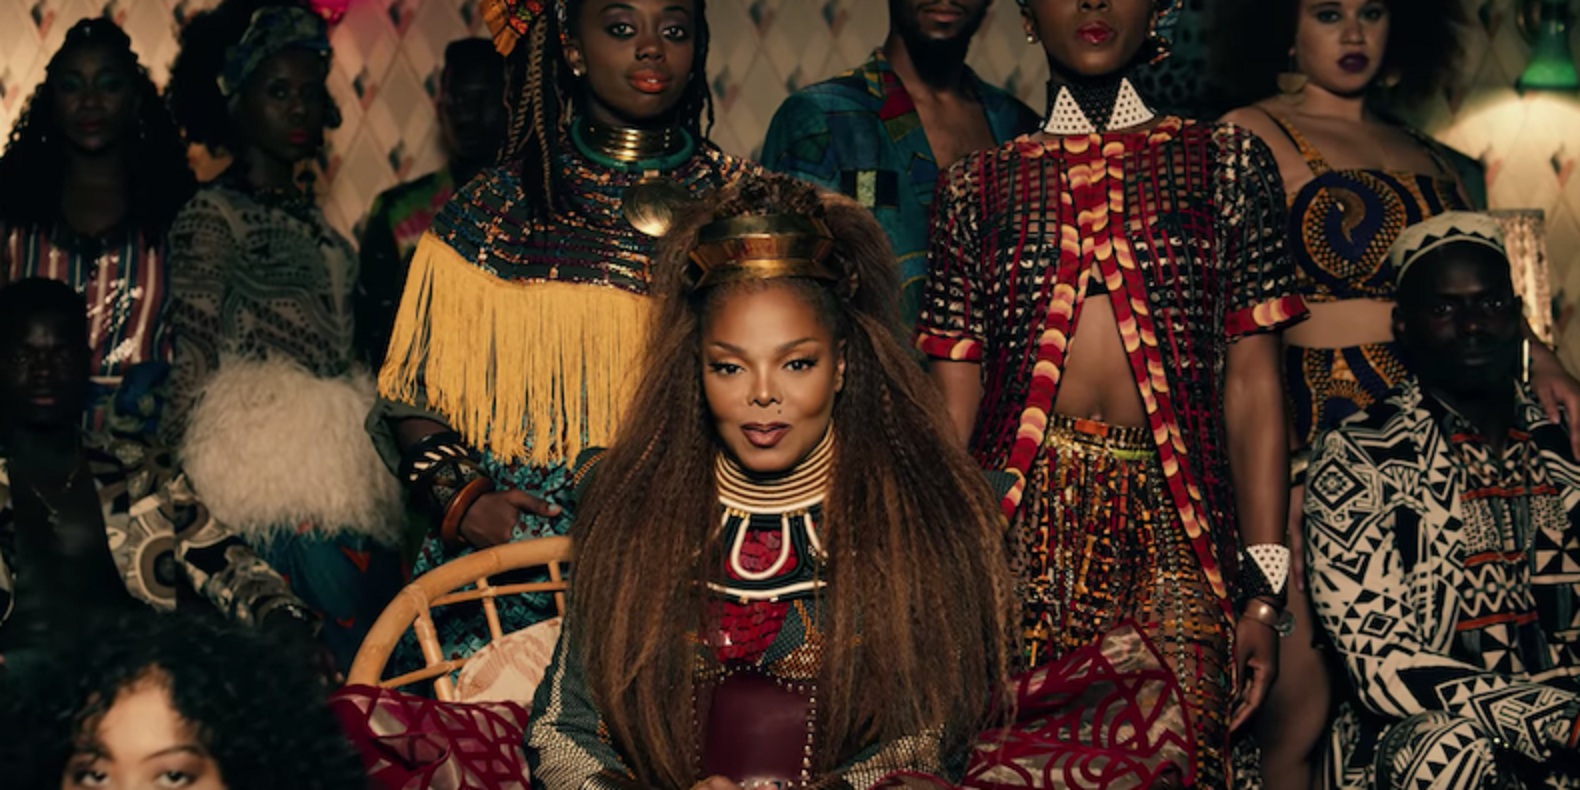 Watch: Janet Jackson’s latest music video for ‘Made For Now’